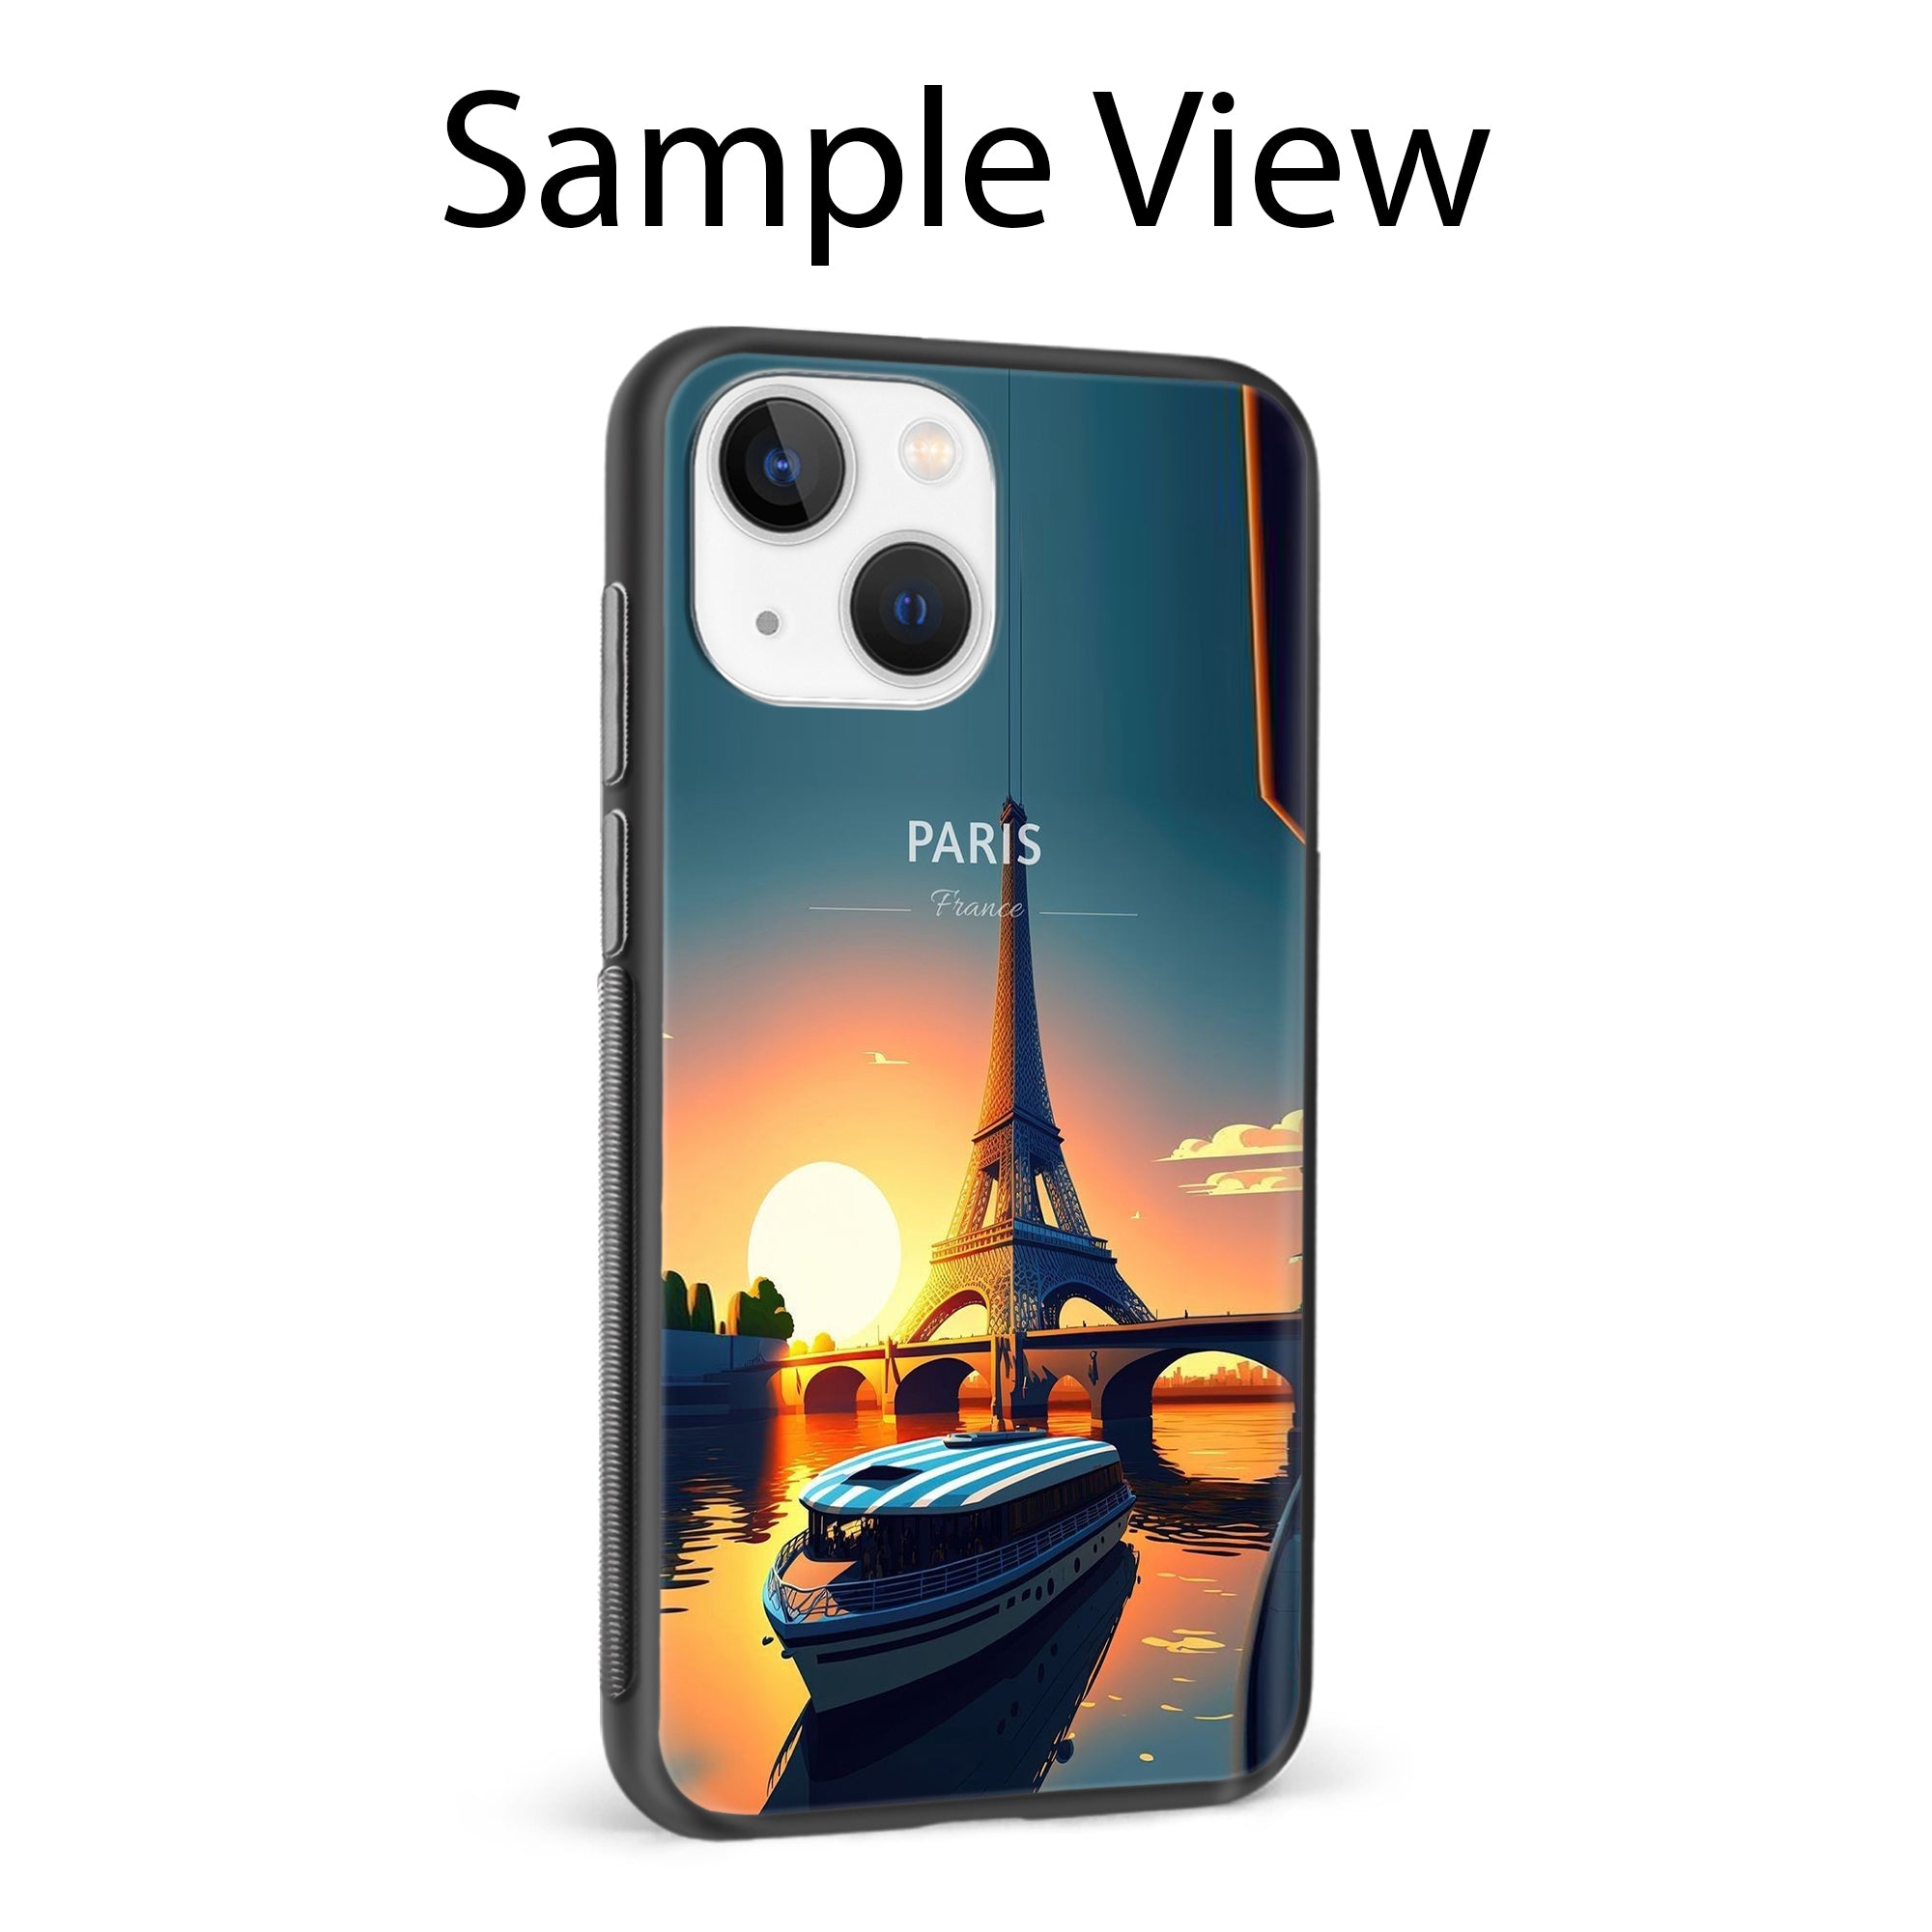 Buy France Metal-Silicon Back Mobile Phone Case/Cover For Samsung Galaxy F41 Online